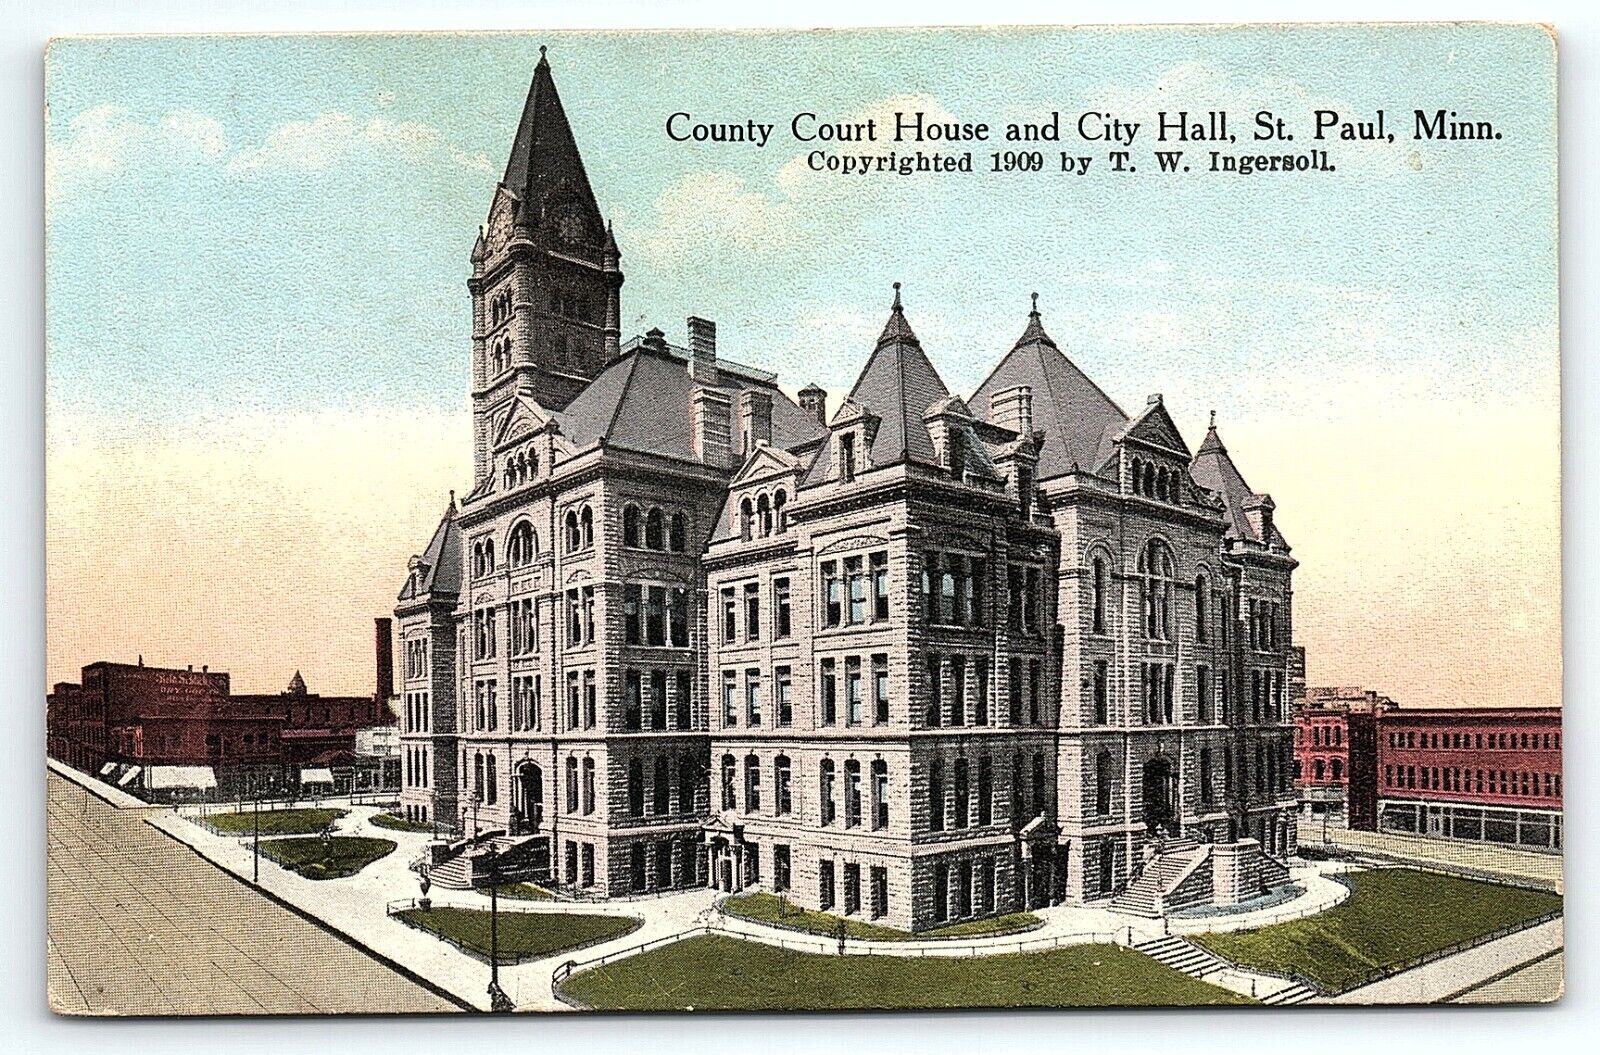 1909 ST PAUL MINNESOTA COUNTY COURT HOUSE AND CITY HALL INGERSOLL POSTCARD P3146